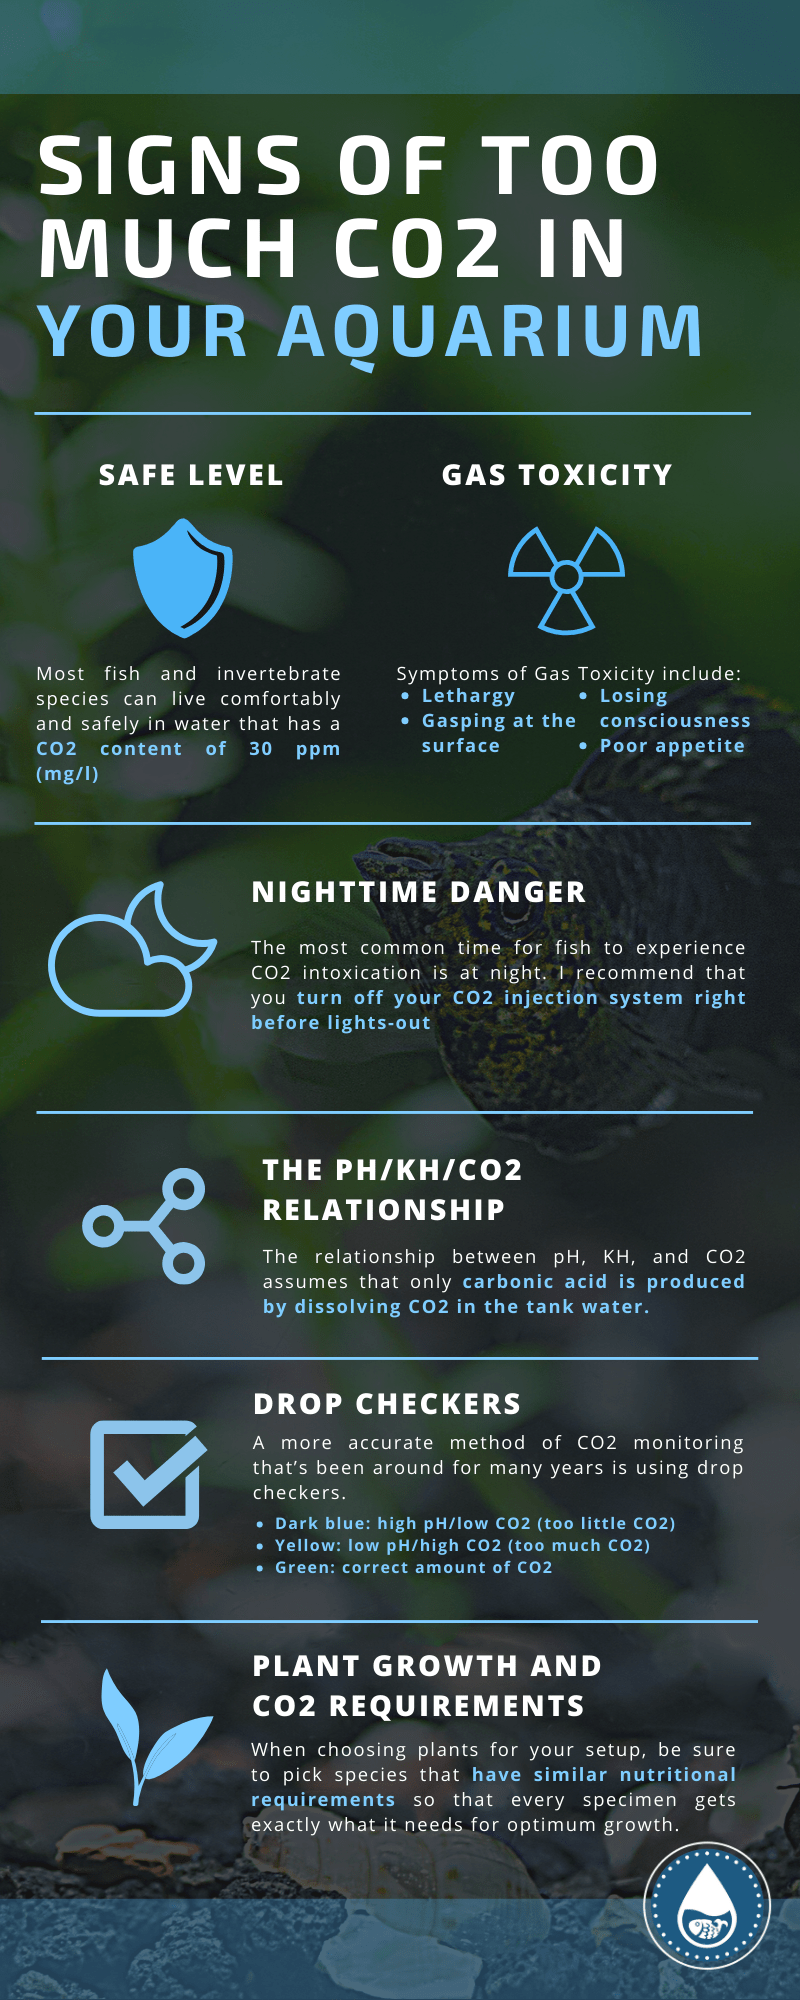 Signs Of Too Much CO2 In Your Aquarium - Infographic